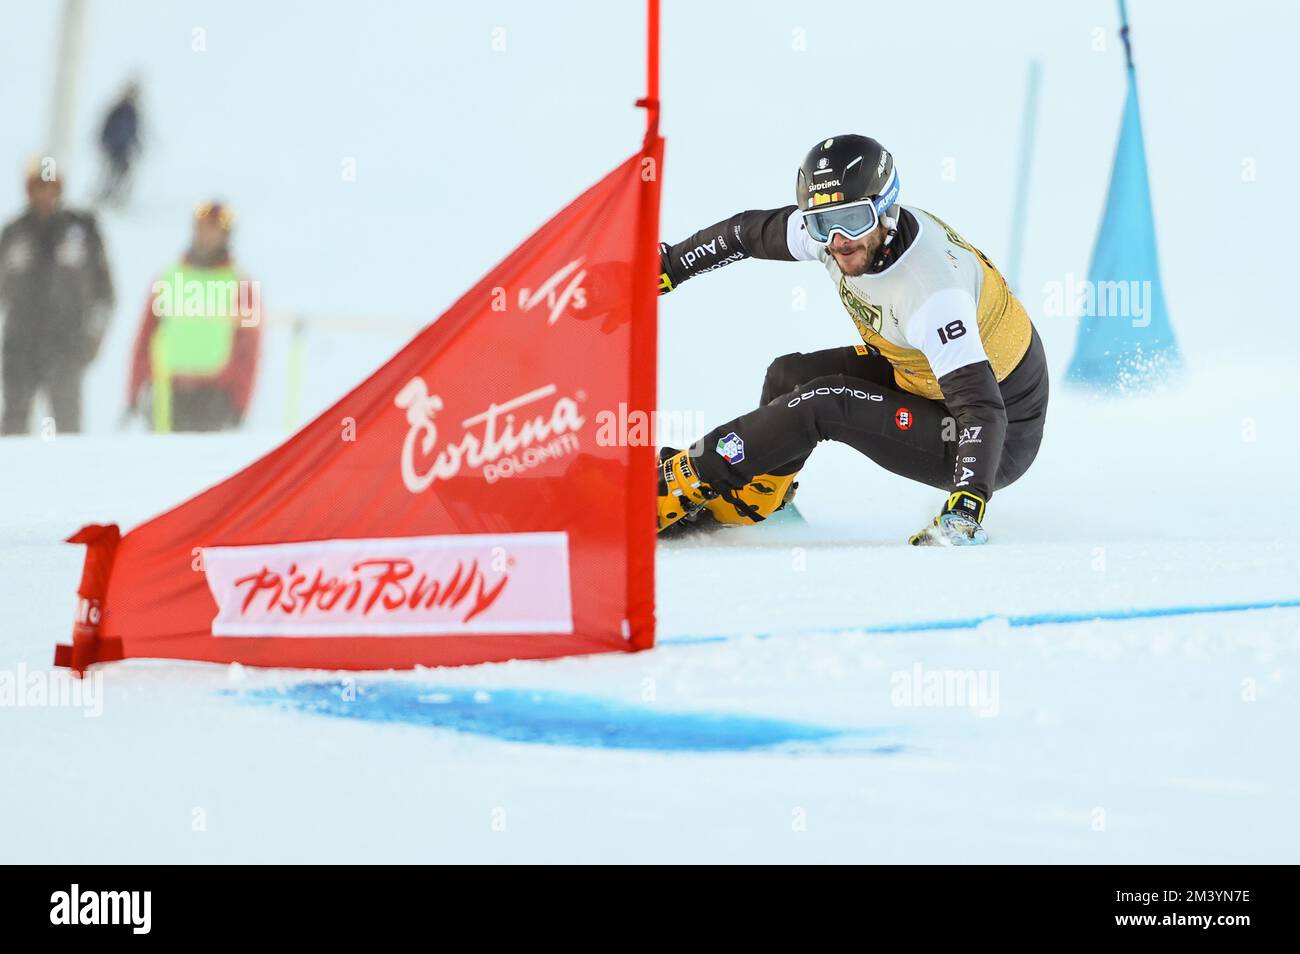 MARCH Aaron (ITA) during Men's Parallel Giant Slalom, Snowboard in Cortina d'Ampezzo, Italy, December 17 2022 Stock Photo